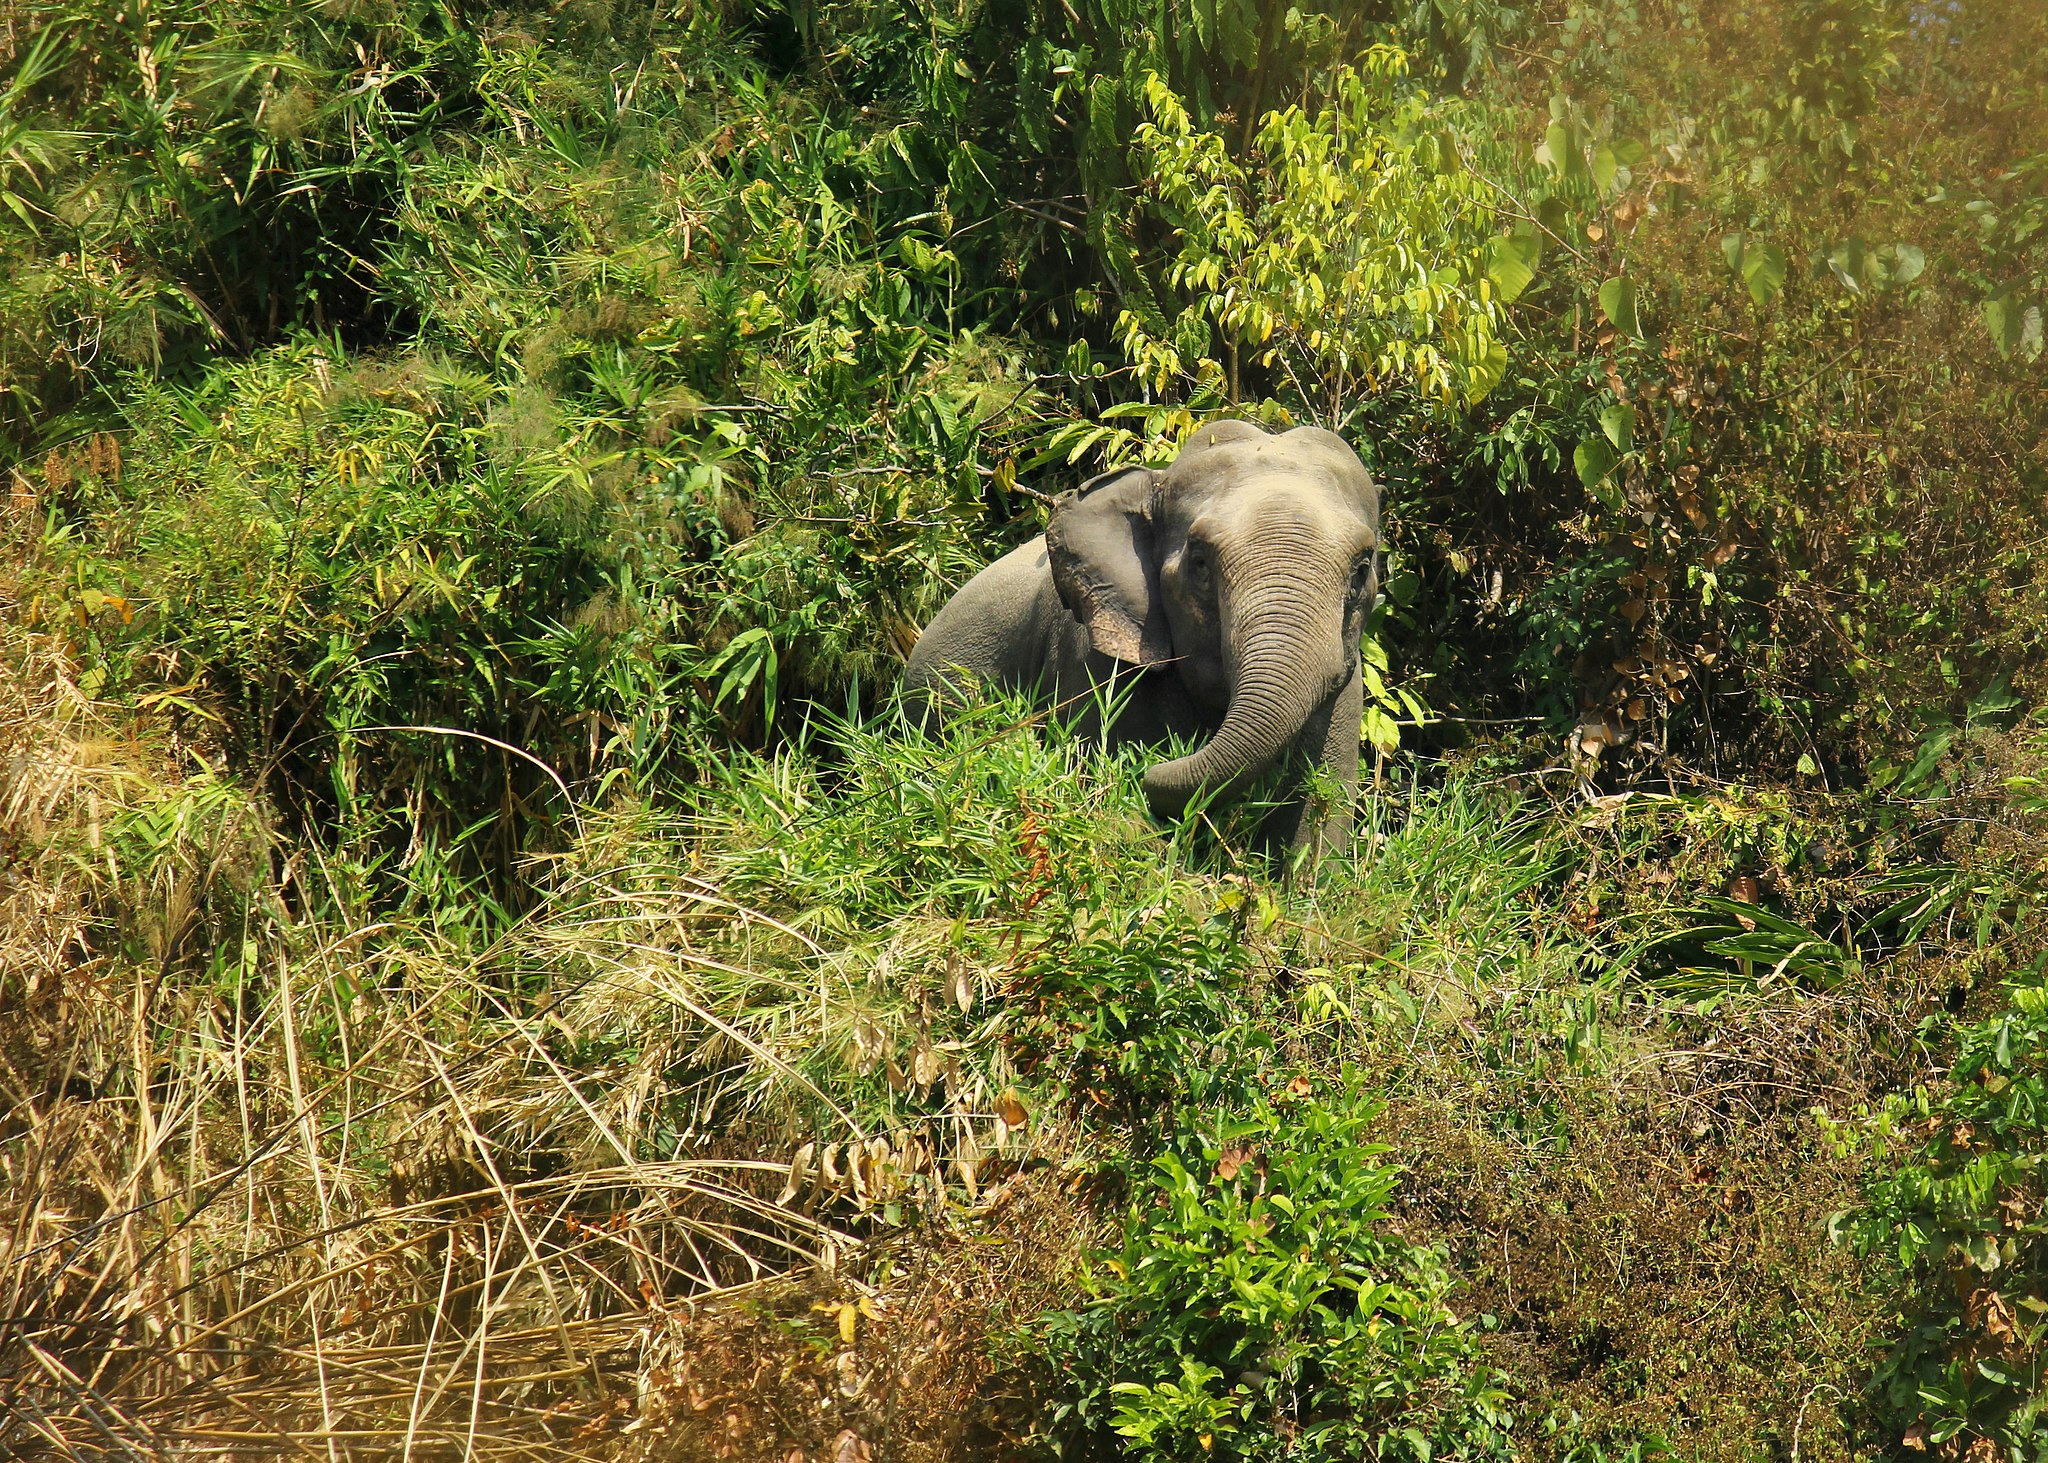 <p>An Asian elephant in Cox&#8217;s Bazar (Image: Syedabbas321/Wikimedia Commons, CC BY-SA 4.0)</p>